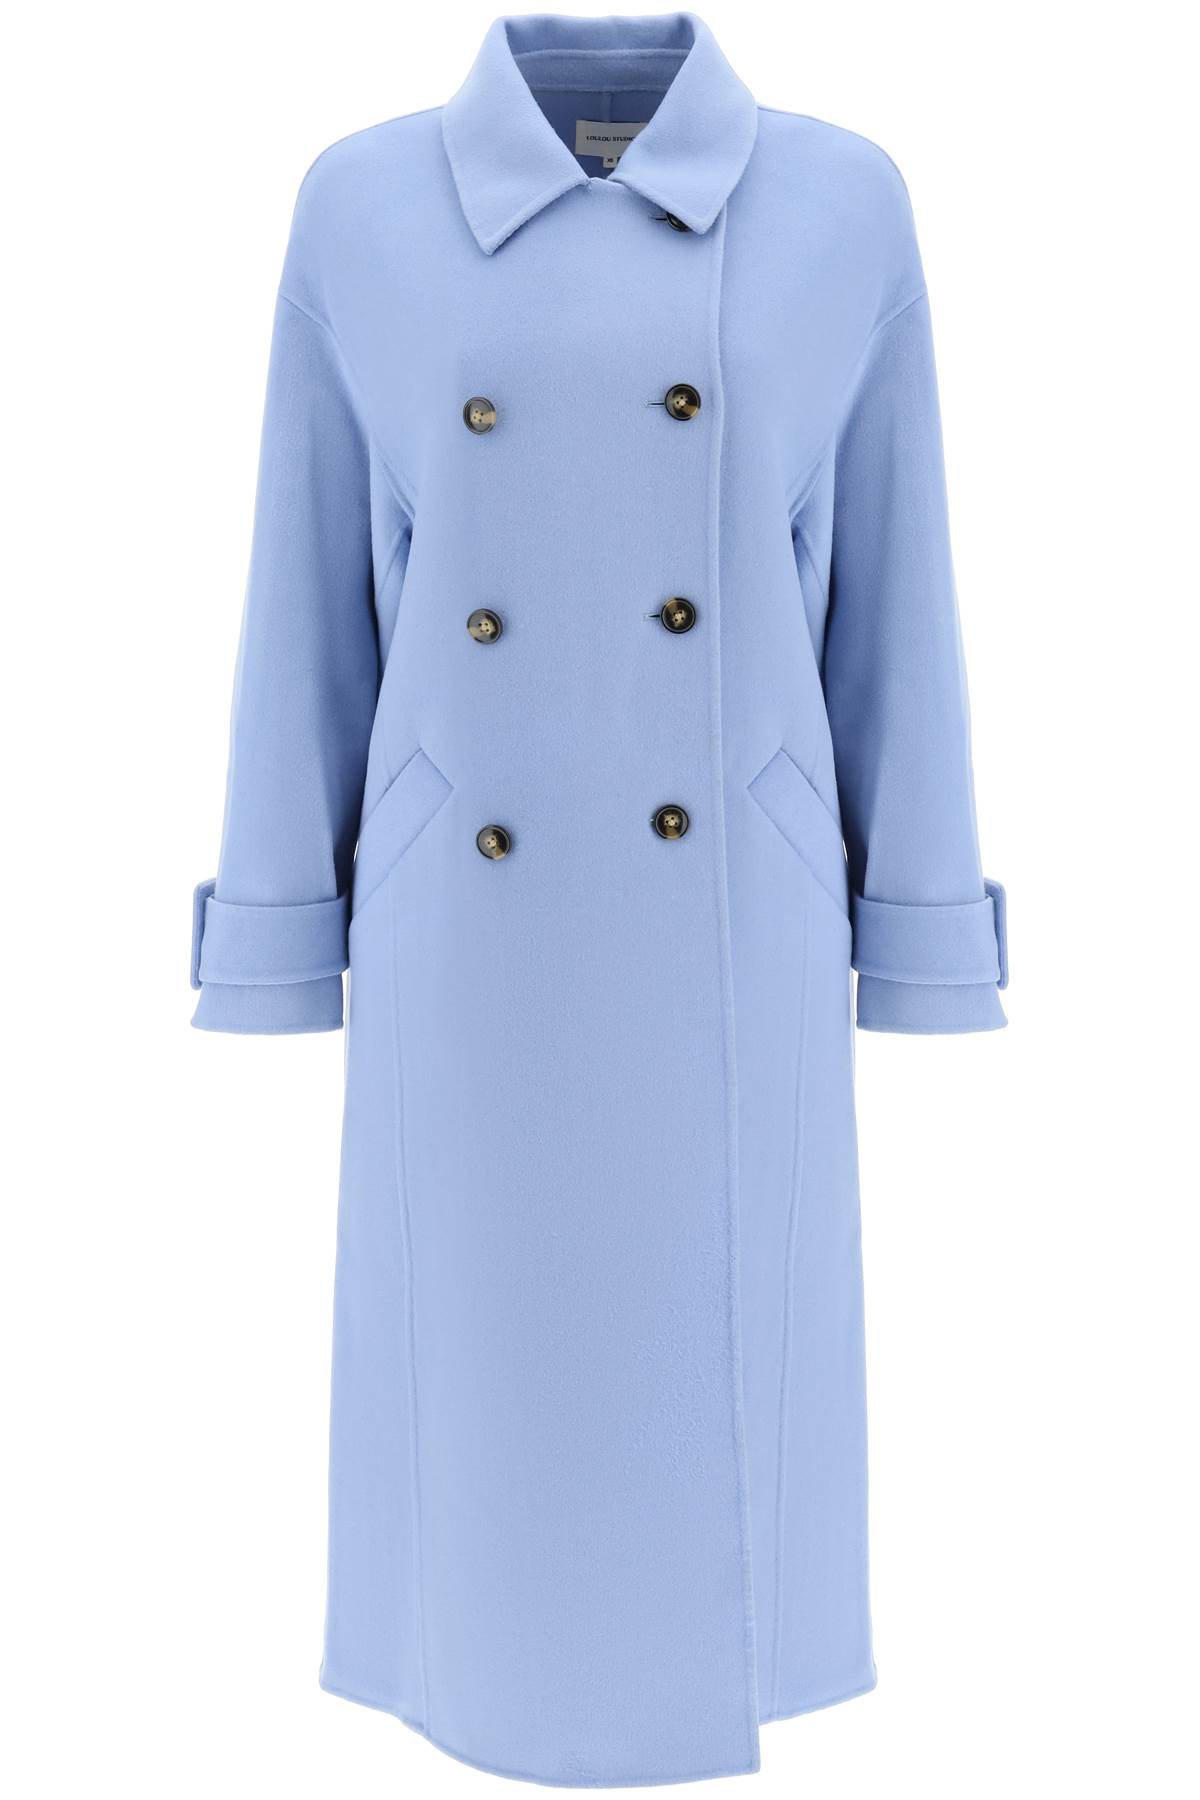 Loulou Studio Wool And Cashmere boras Coat